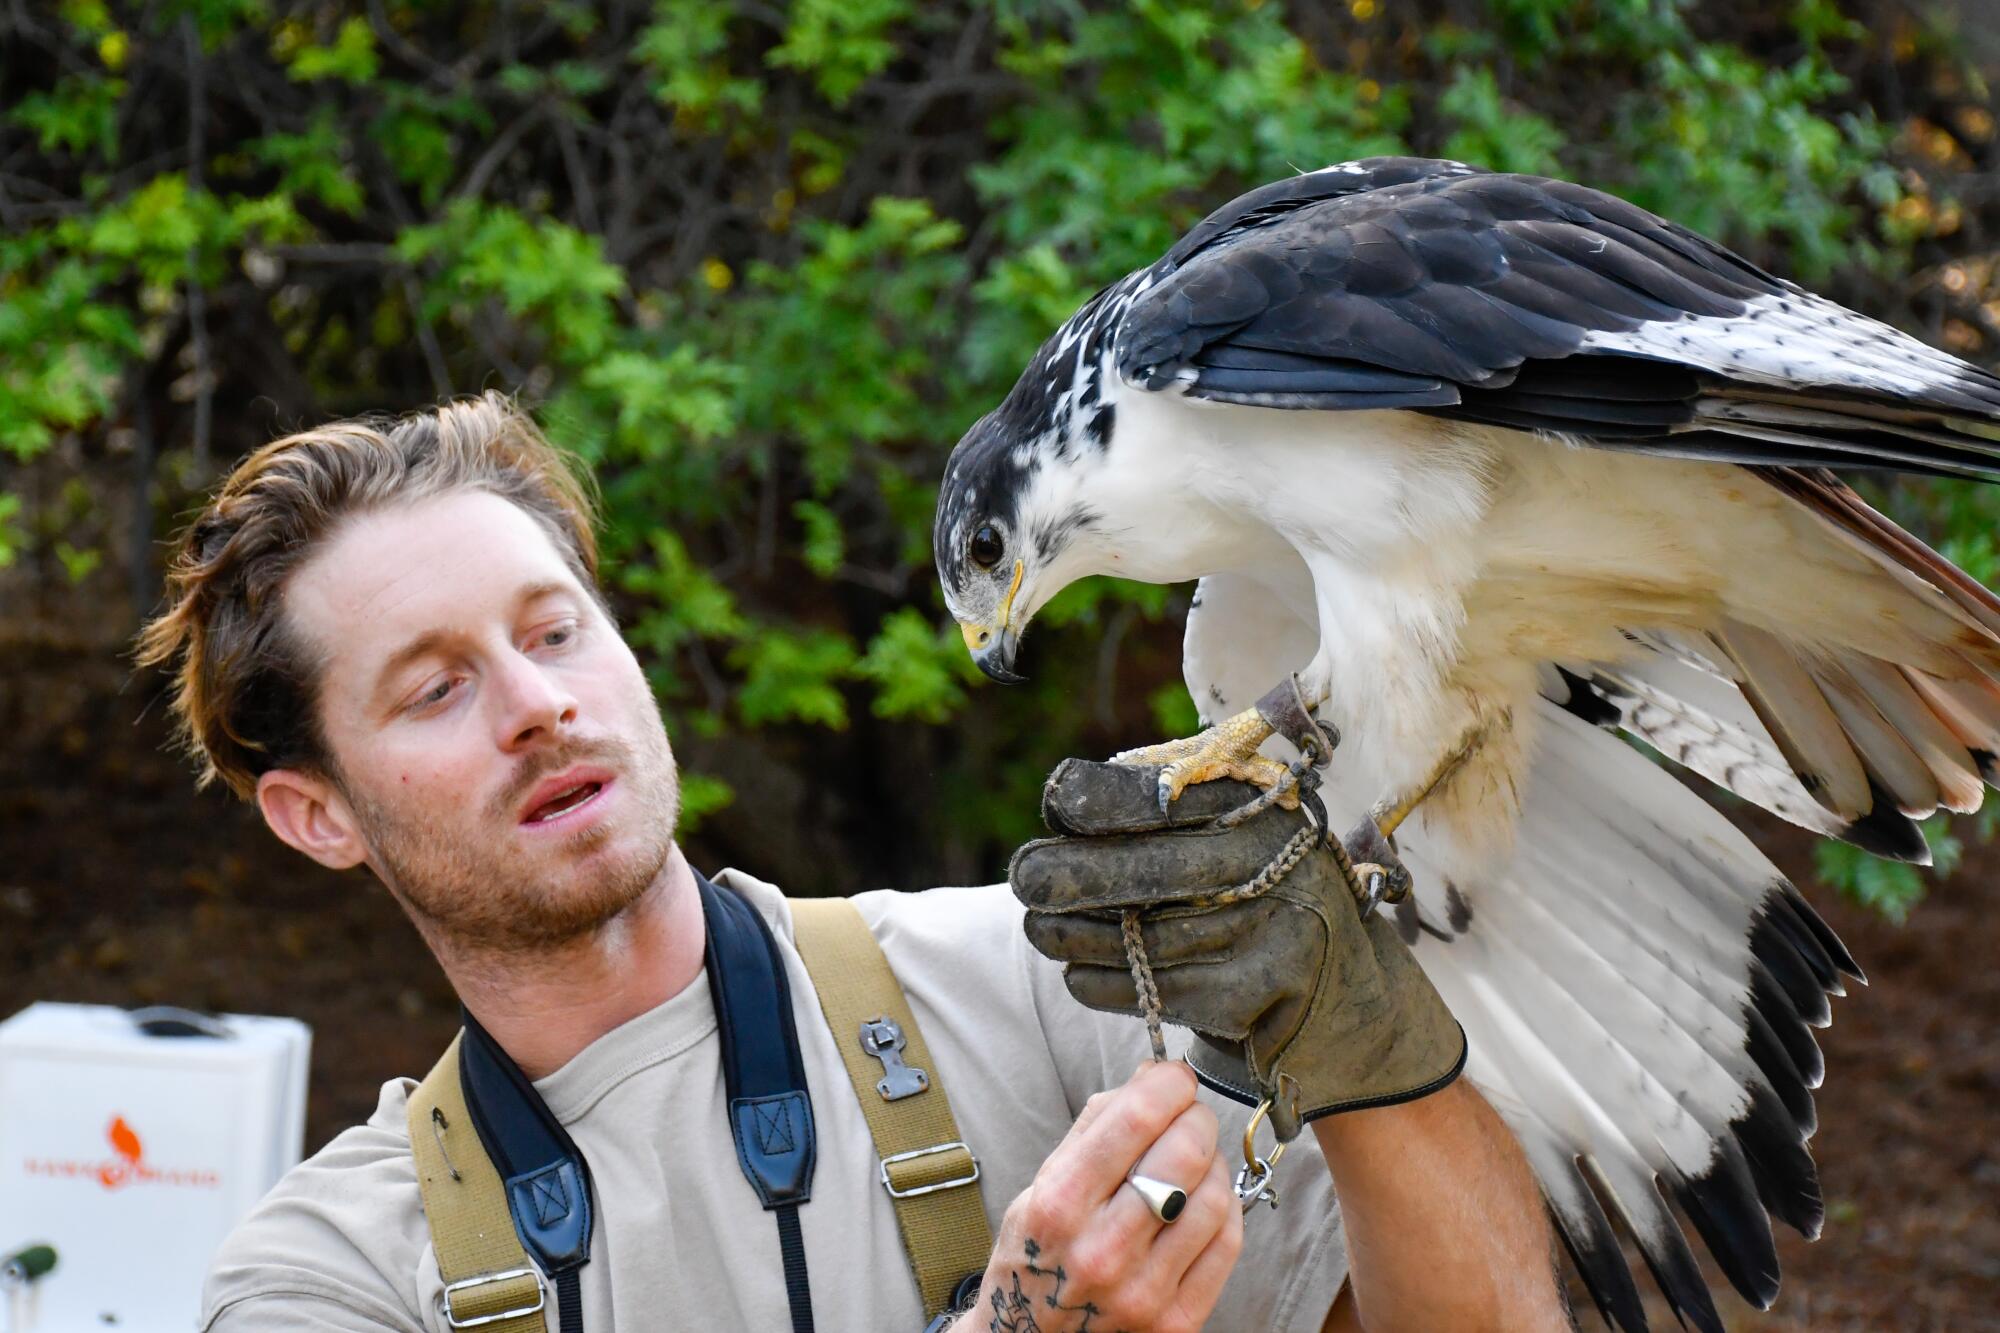 Adam Baz of Hawk in Hand offers a close-up with an African Augur Buzzard named Kanoni.